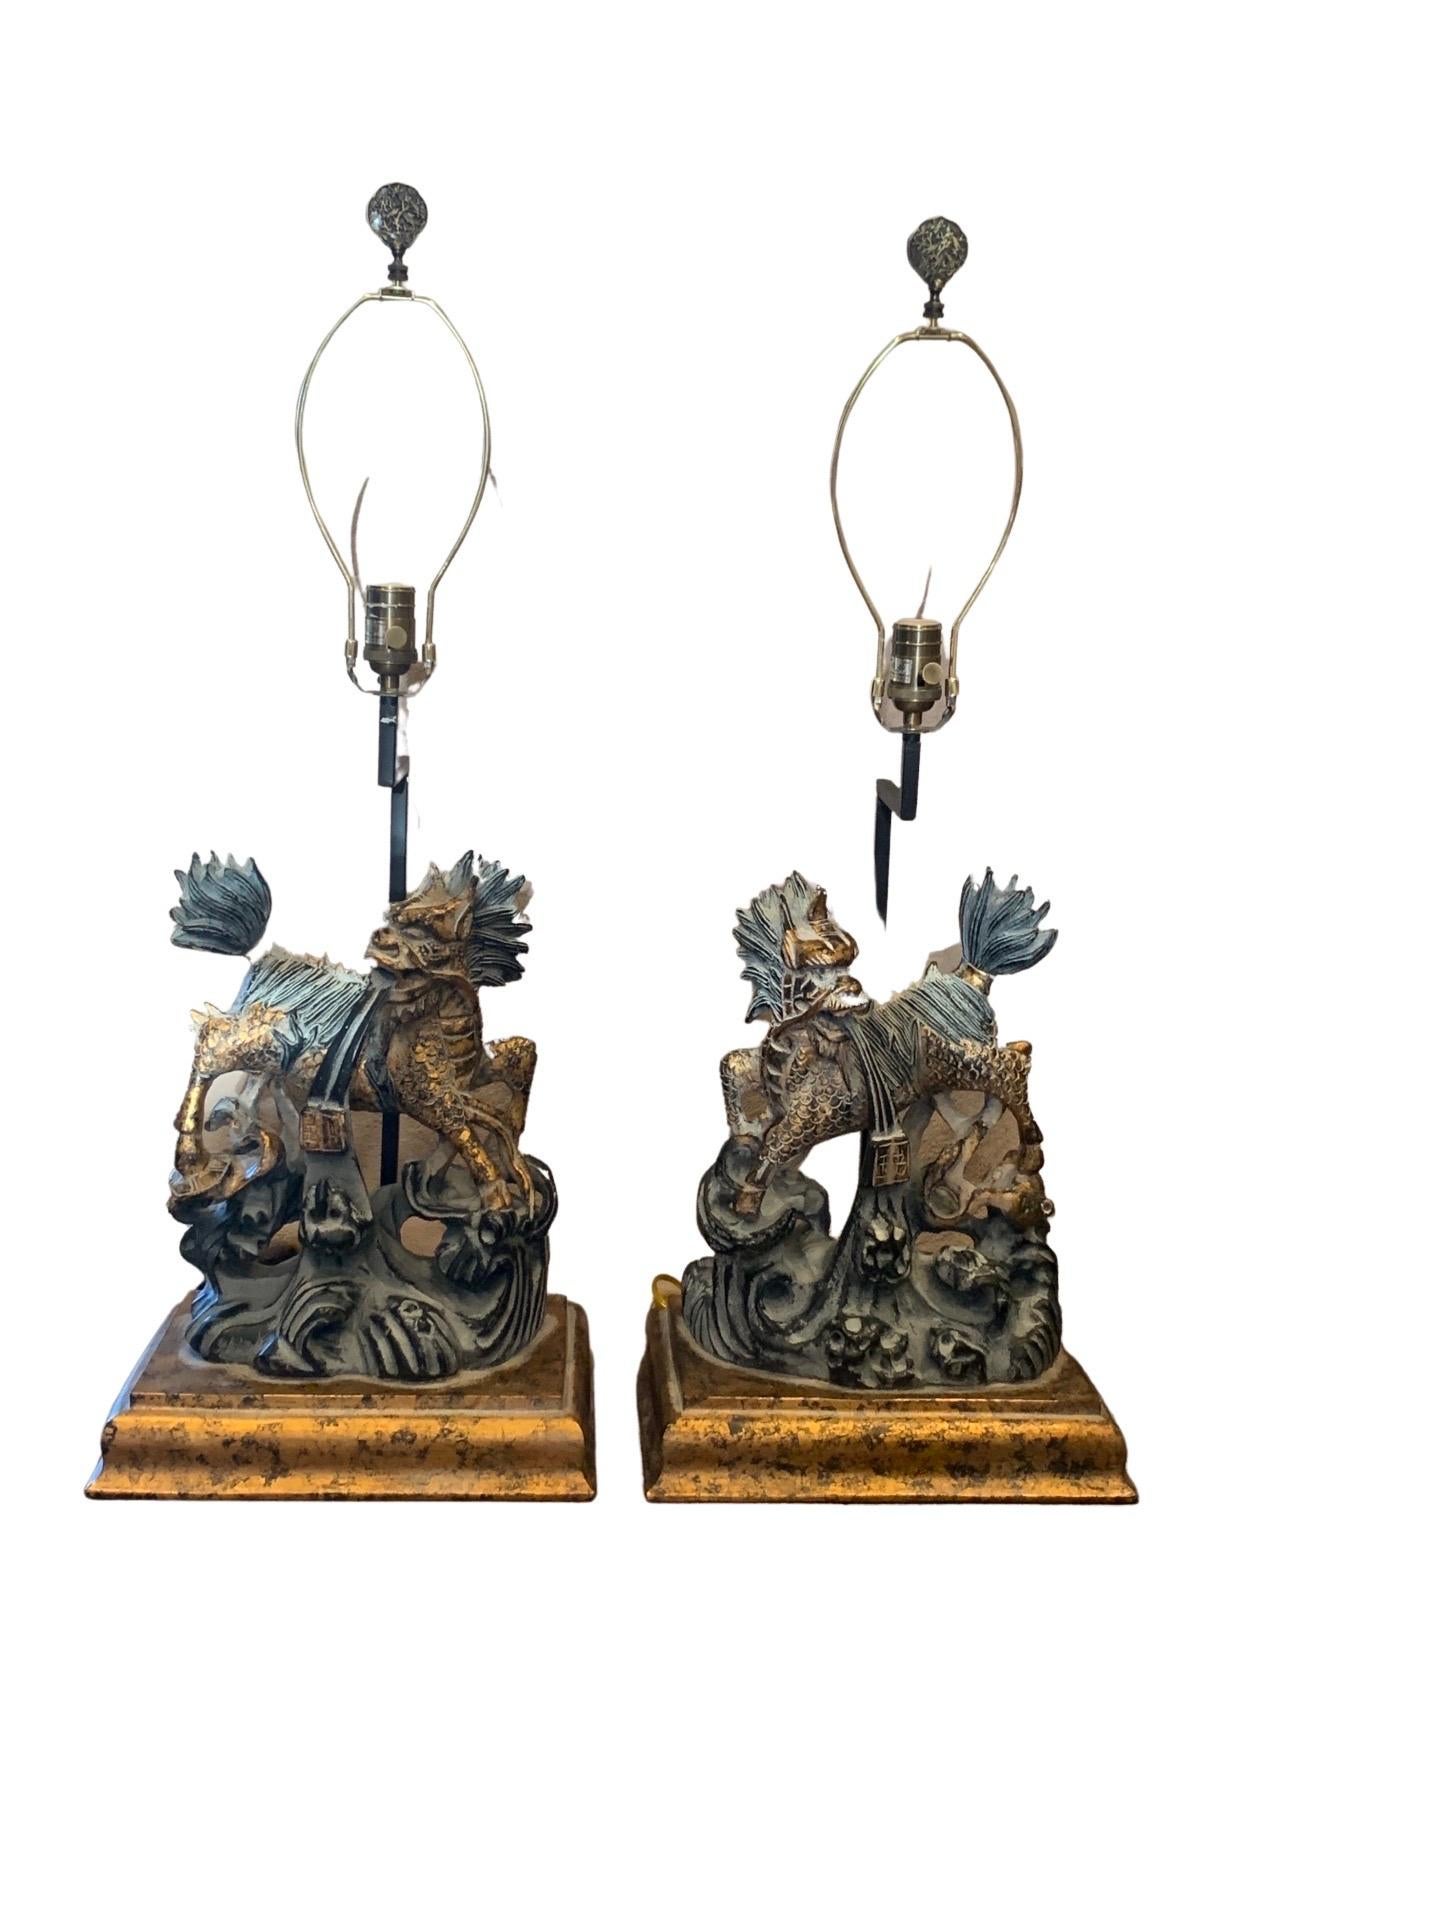 These beautiful pair of large Foo dog lamps are a matching left and right pair. They are hand-painted and faux finished to look antiqued. The dogs in black and gold are highlighted with gray. Designer purchased for a very upscale luxe home in Palm